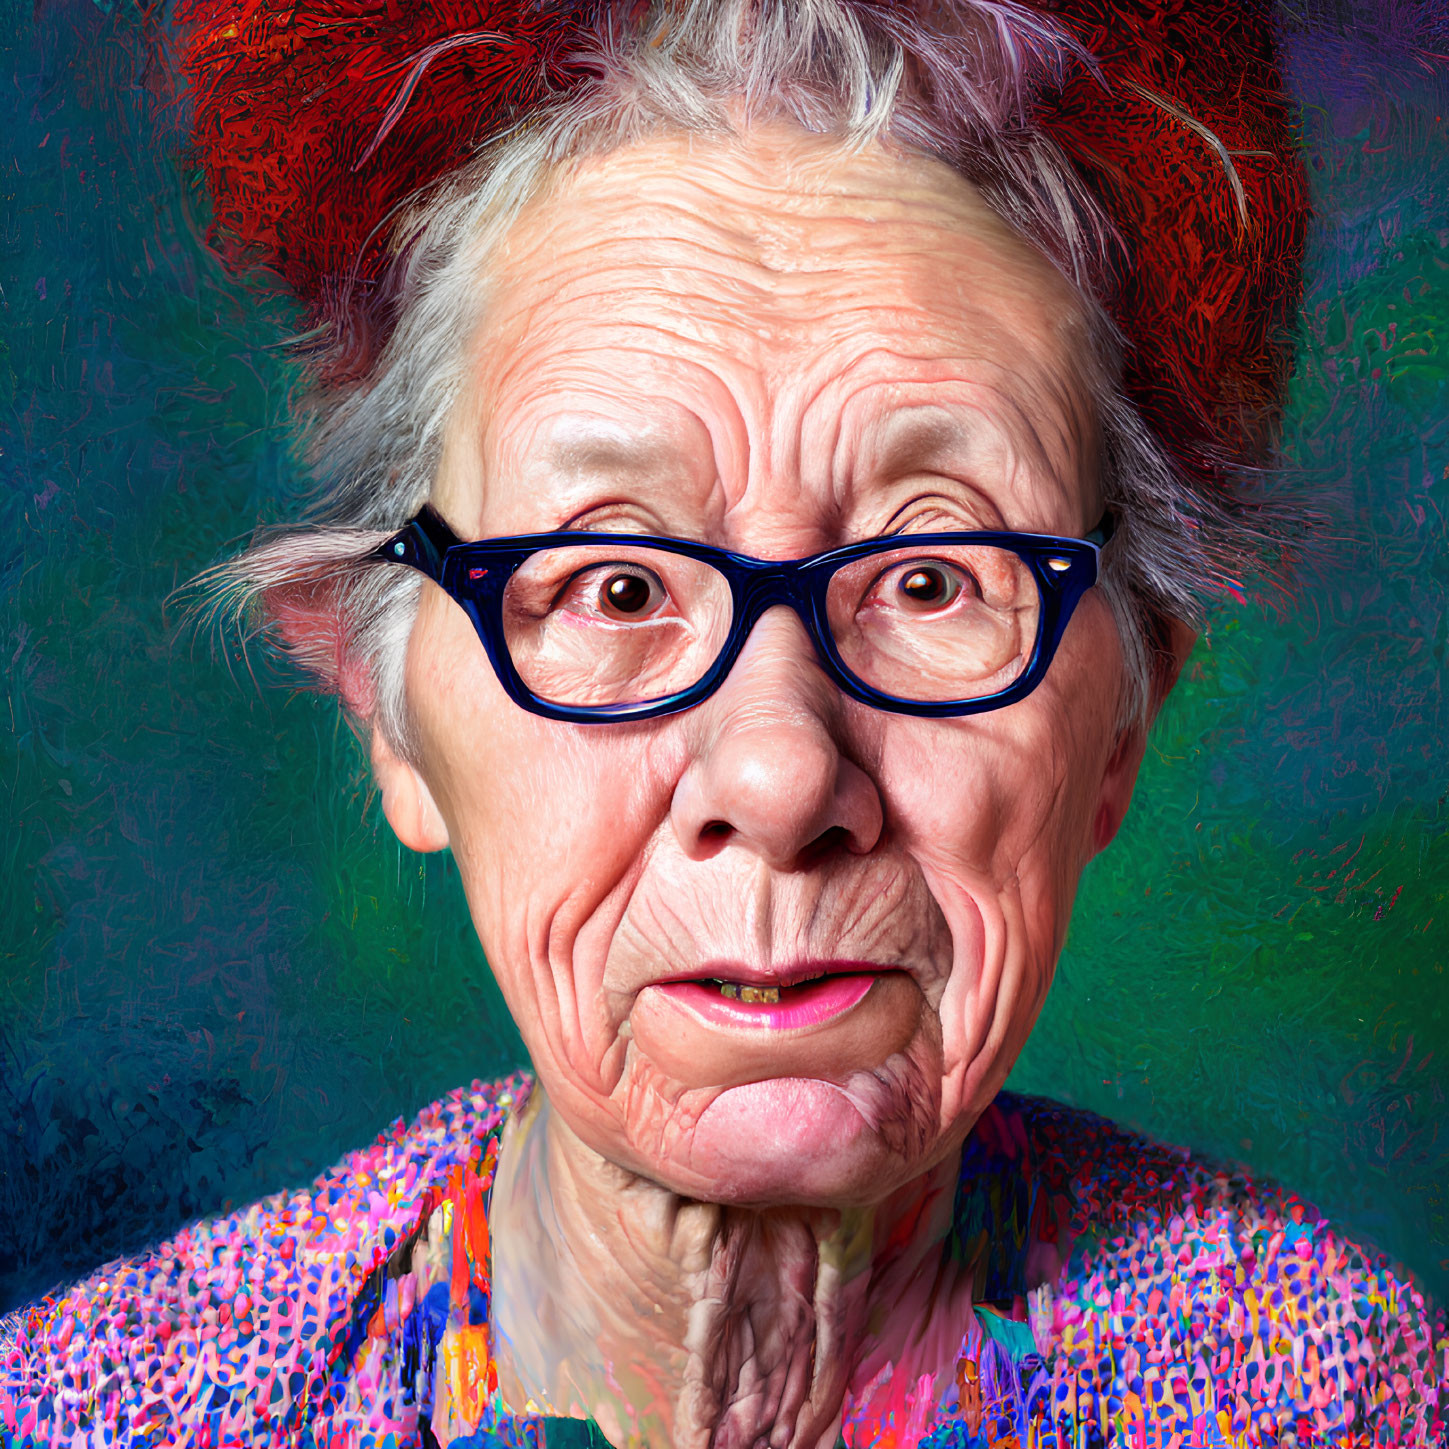 Elderly woman with red hair and glasses on colorful background